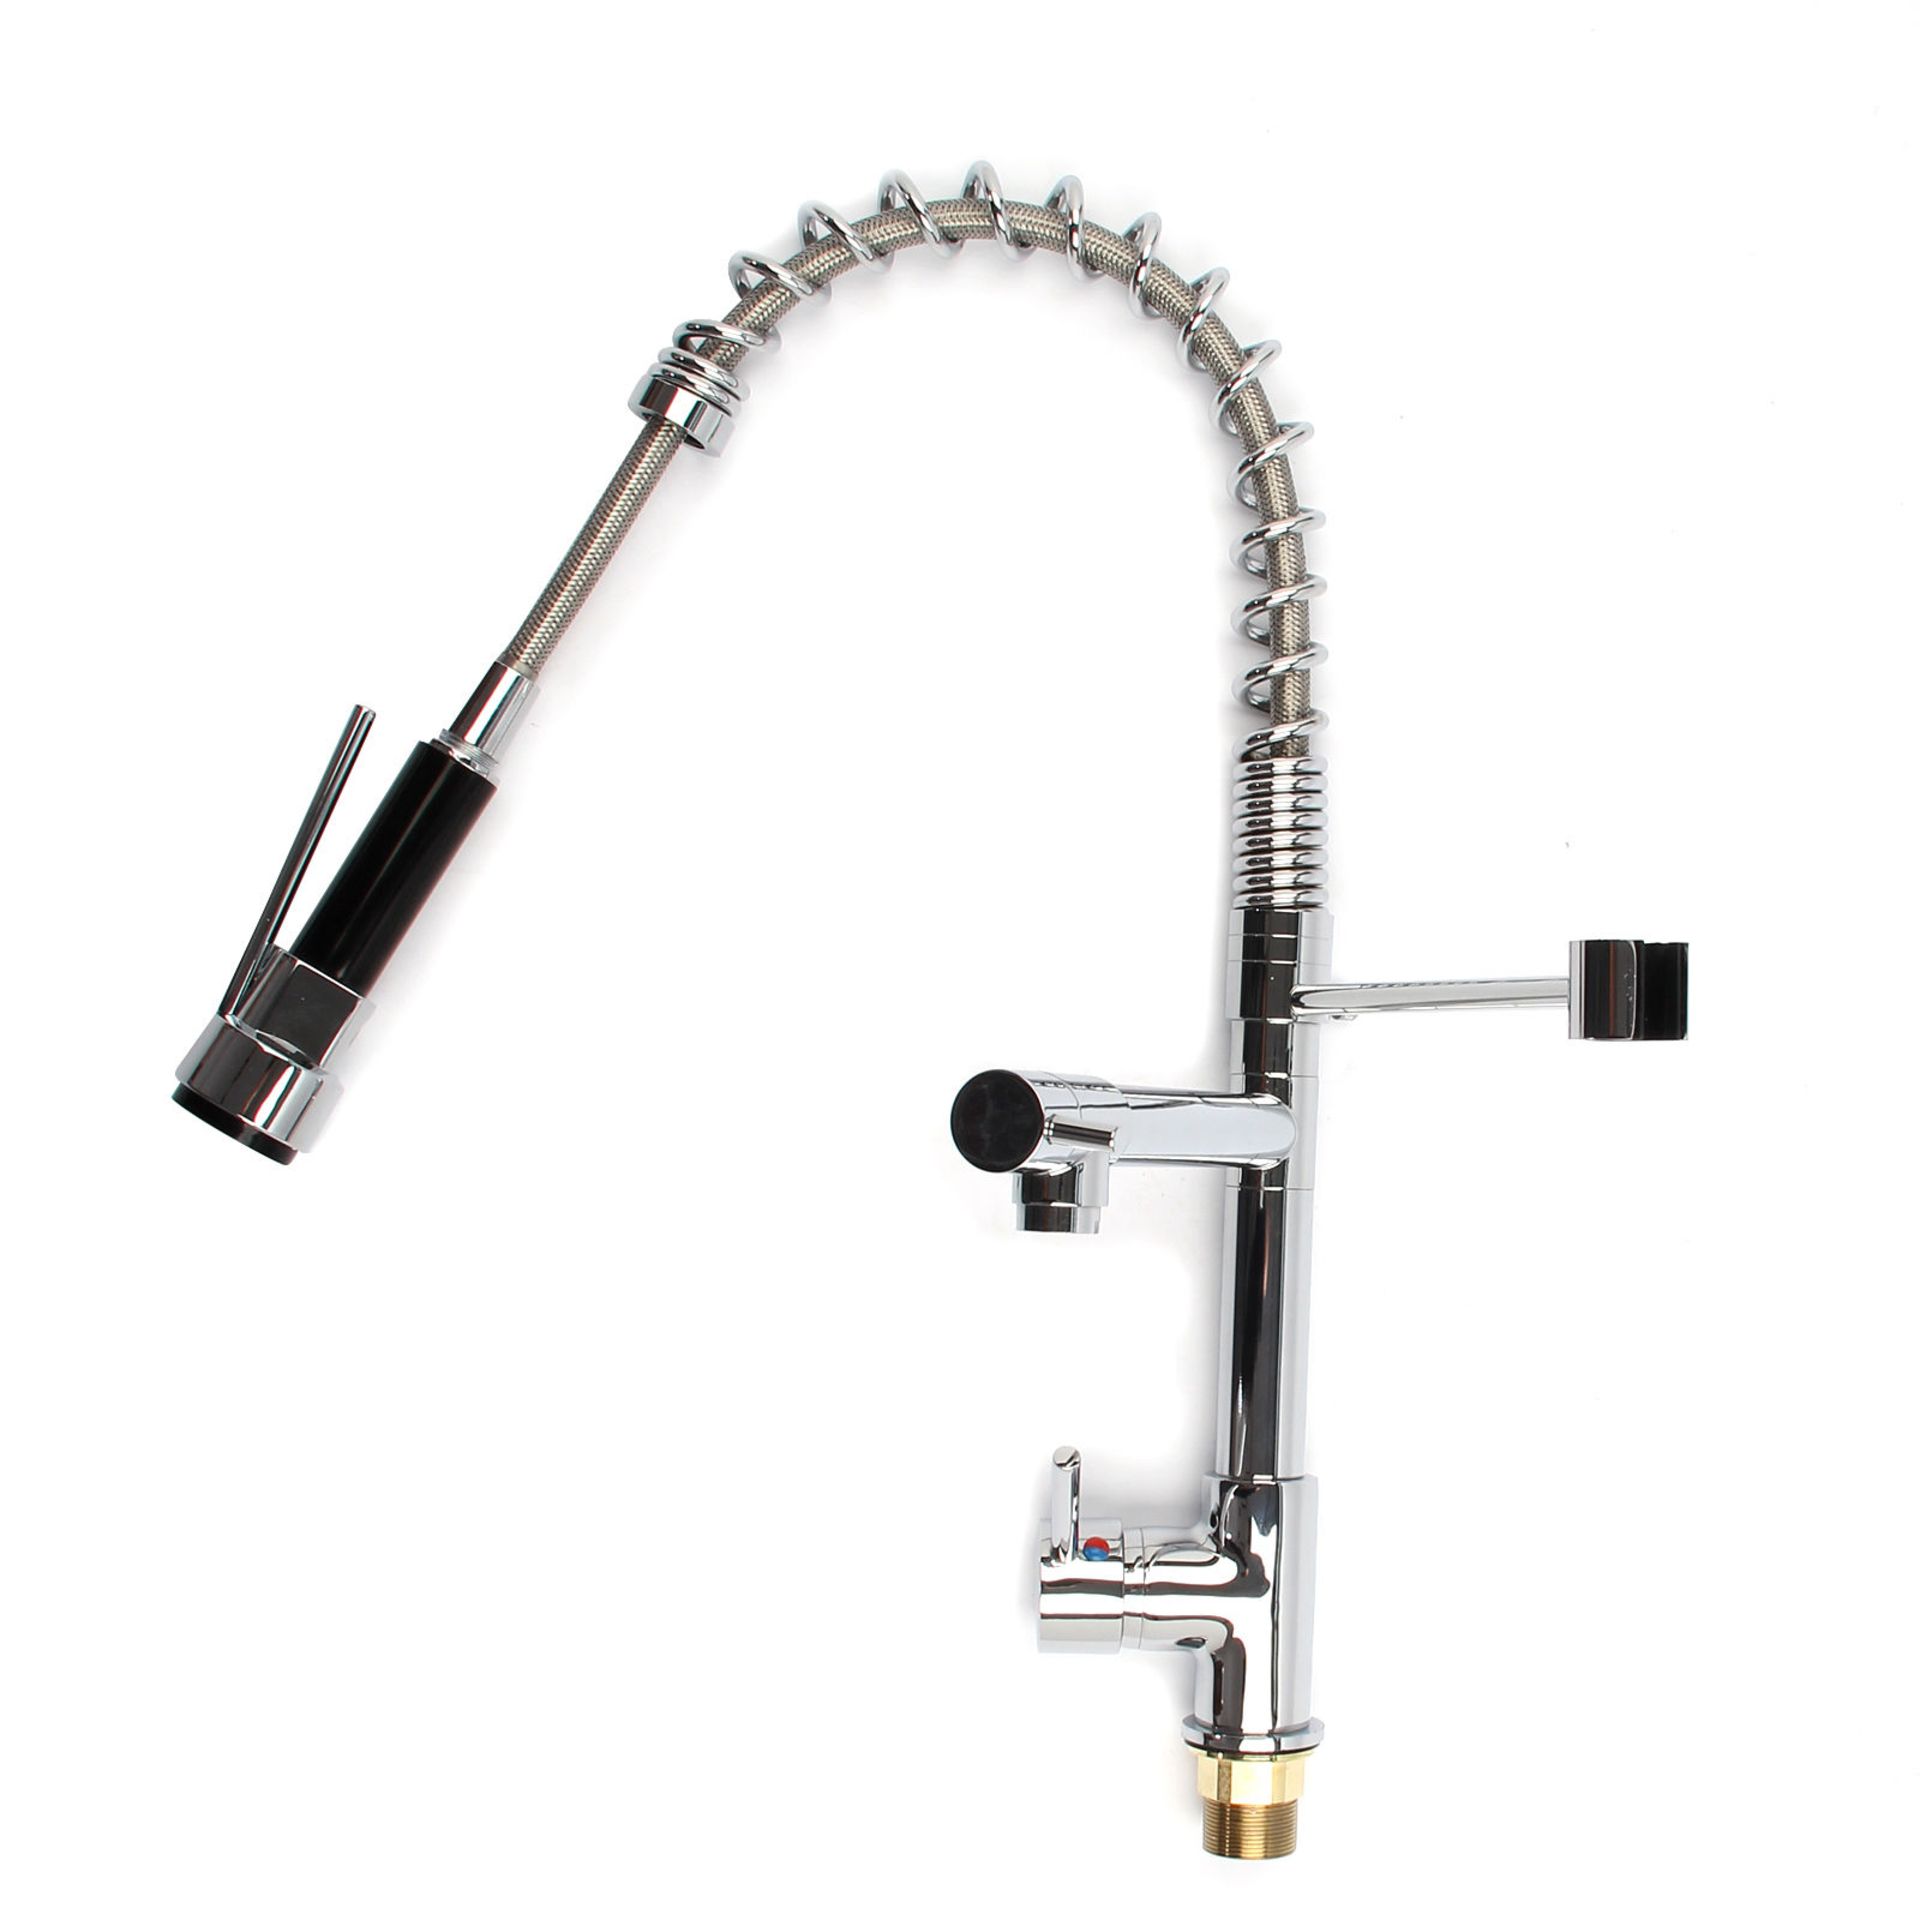 Bentley Modern Monobloc Chrome Brass Pull Out Spray Mixer Tap. RRP £349.99. This tap is from our - Image 3 of 4